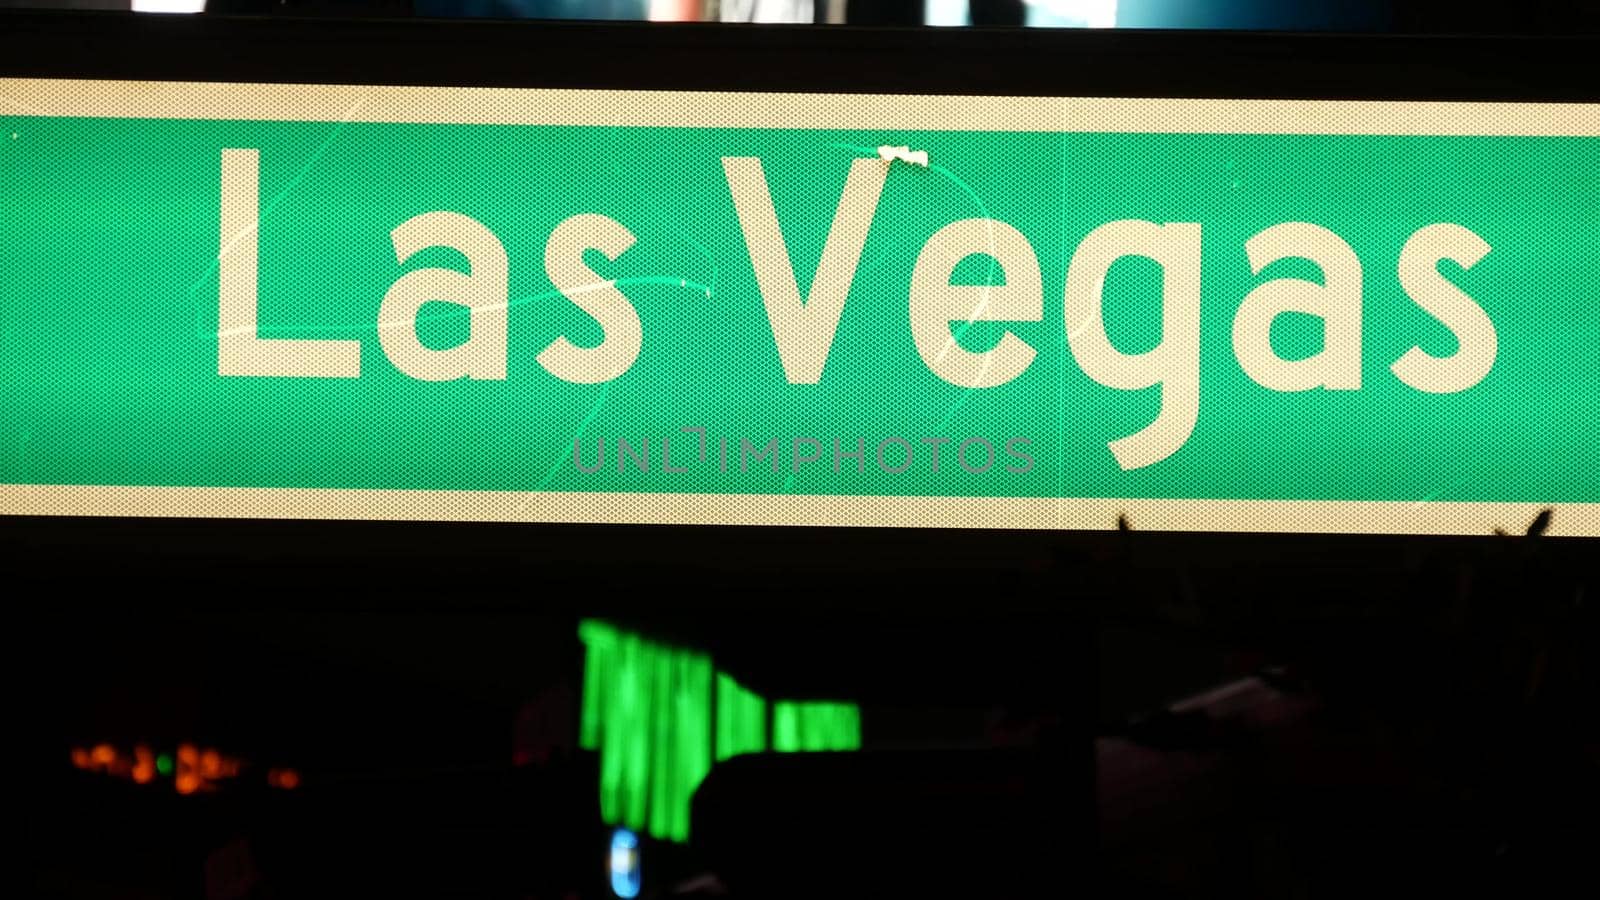 Fabulos Las Vegas, traffic sign glowing on The Strip in sin city of USA. Iconic signboard on the road to Fremont street in Nevada. Illuminated symbol of casino money playing and bets in gaming area.